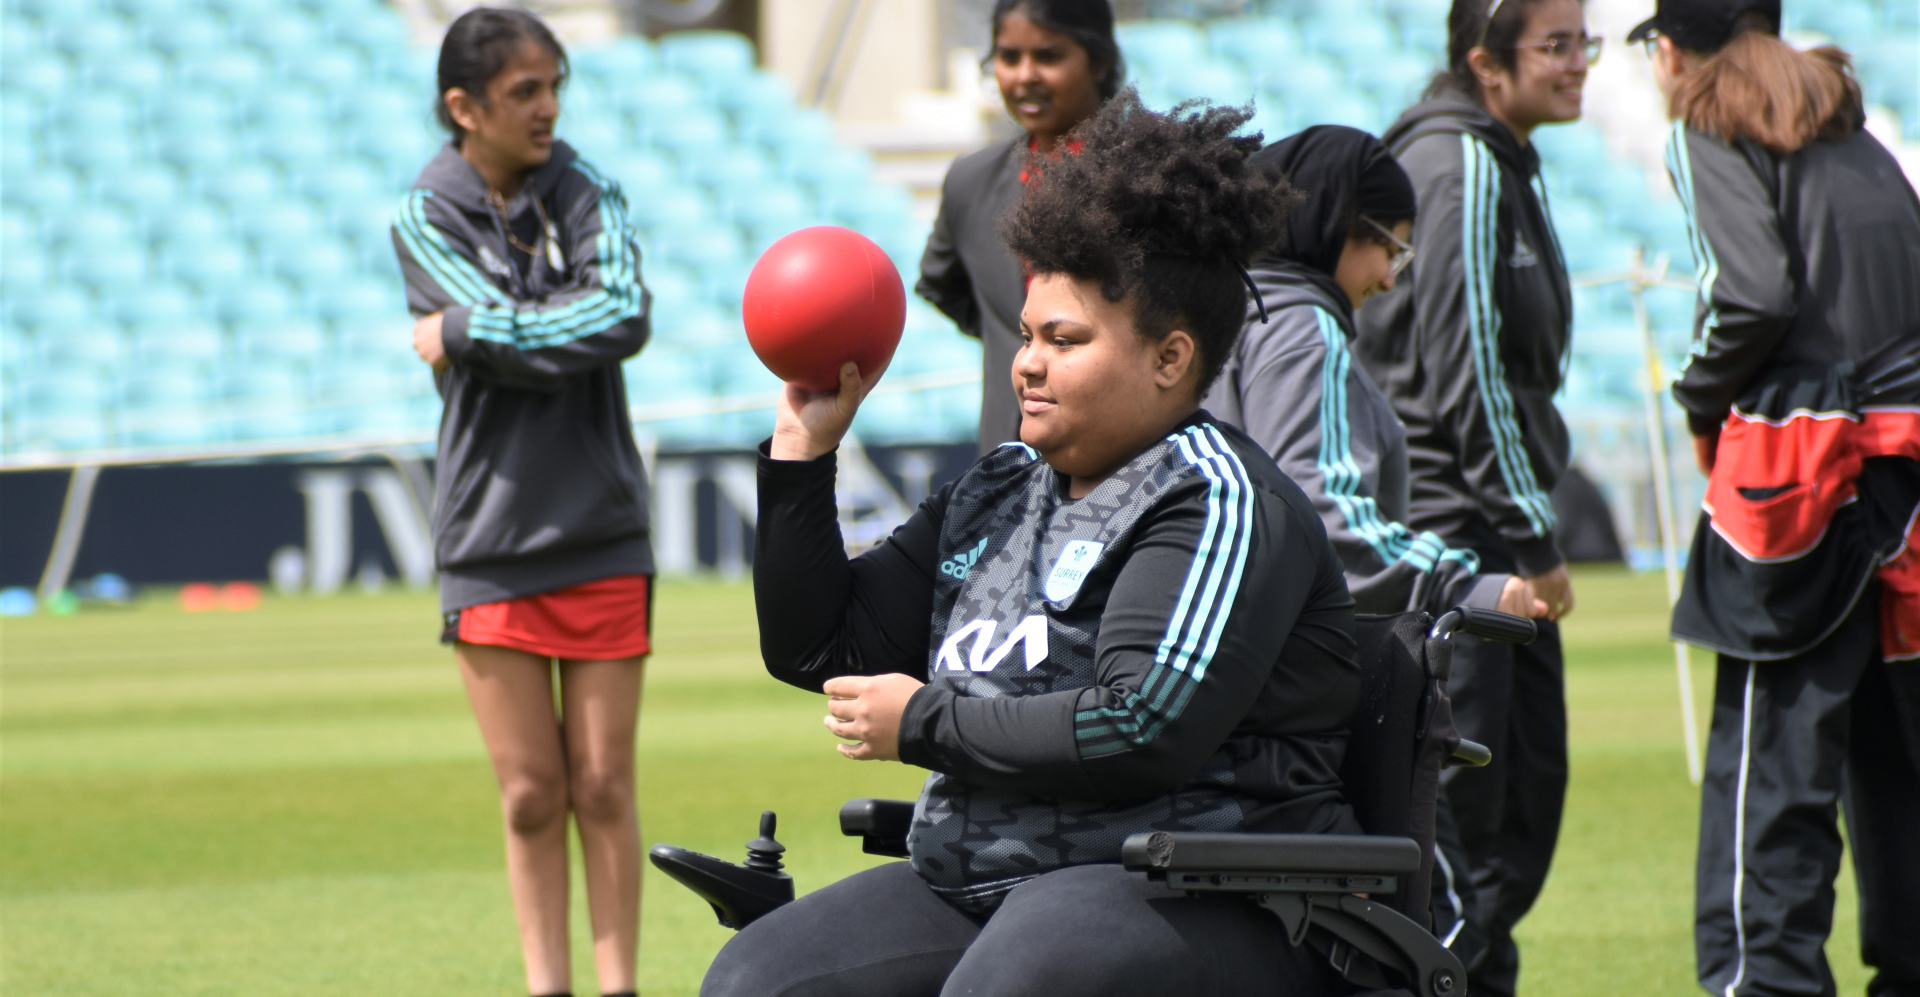 Disability Day delights at The Kia Oval